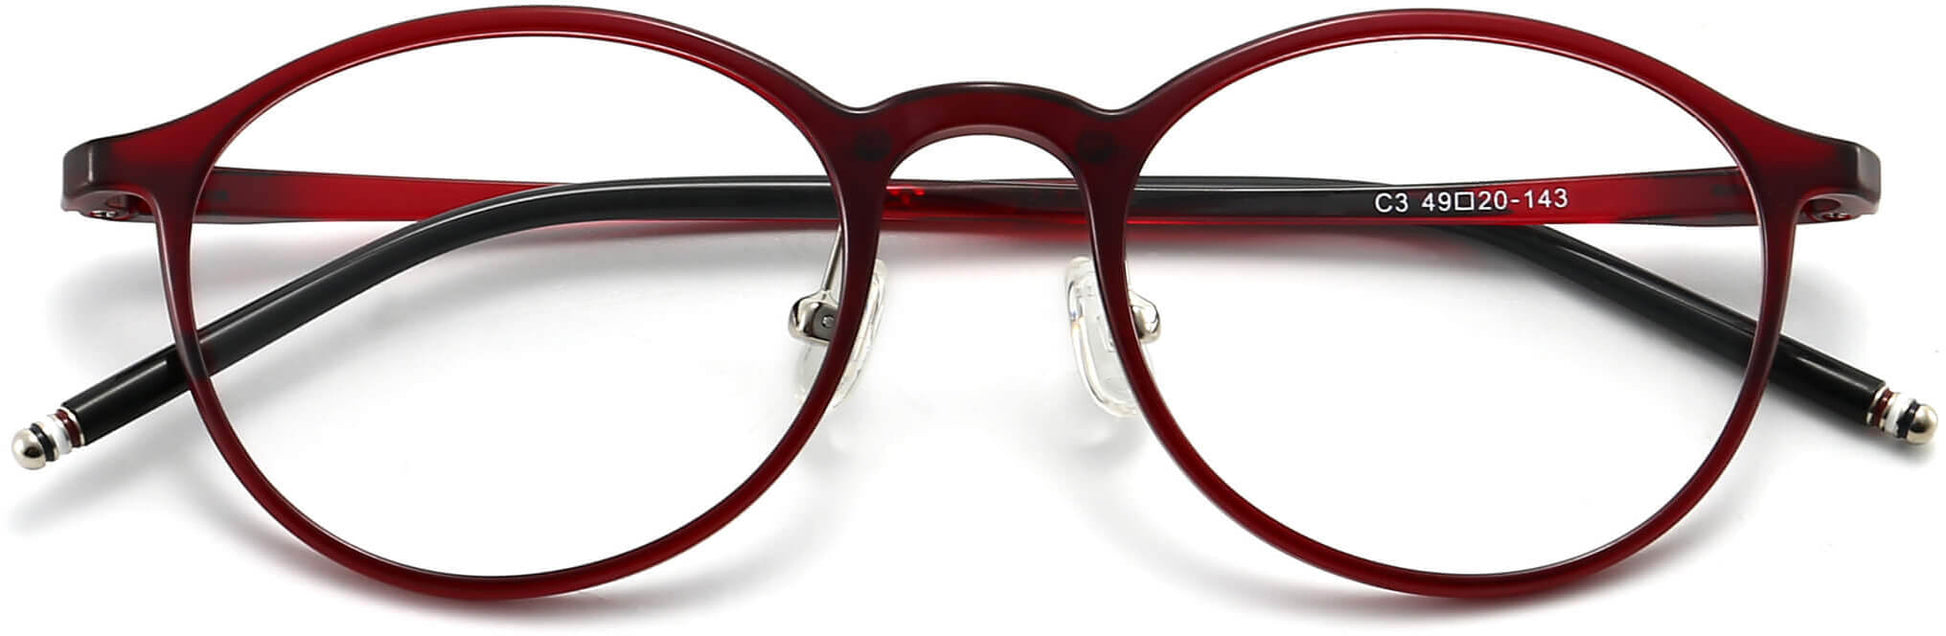 maron round red Eyeglasses from ANRRI, closed view